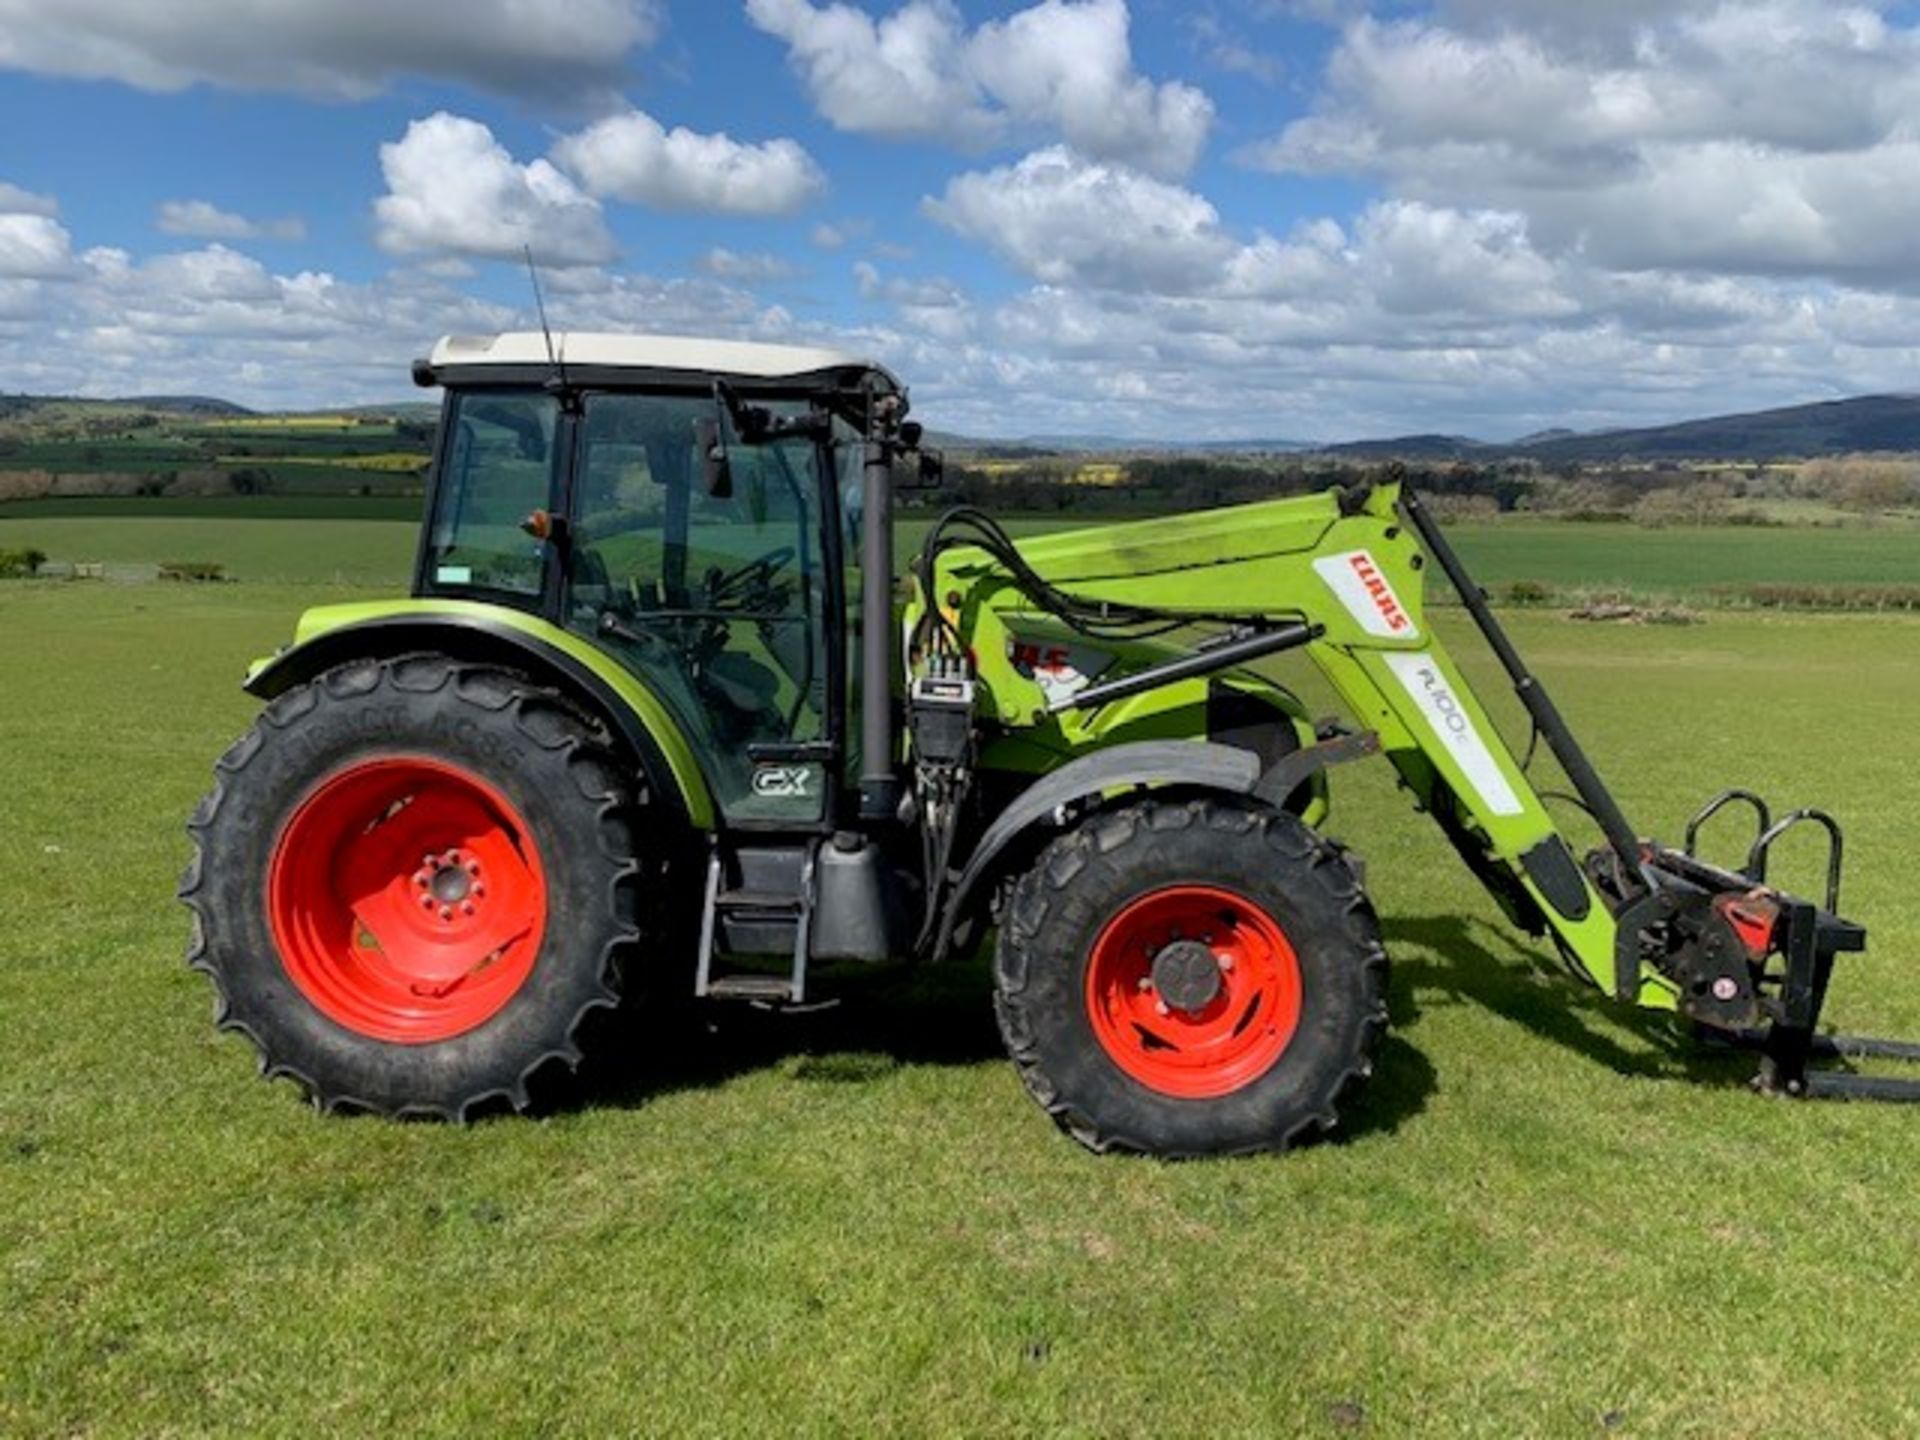 CLAAS AXOS 340 4WD TRACTOR REG.DX13 FAM FIRST REG 14/5/13 105HP C/W CLAAS FL100 LOADER AND A10